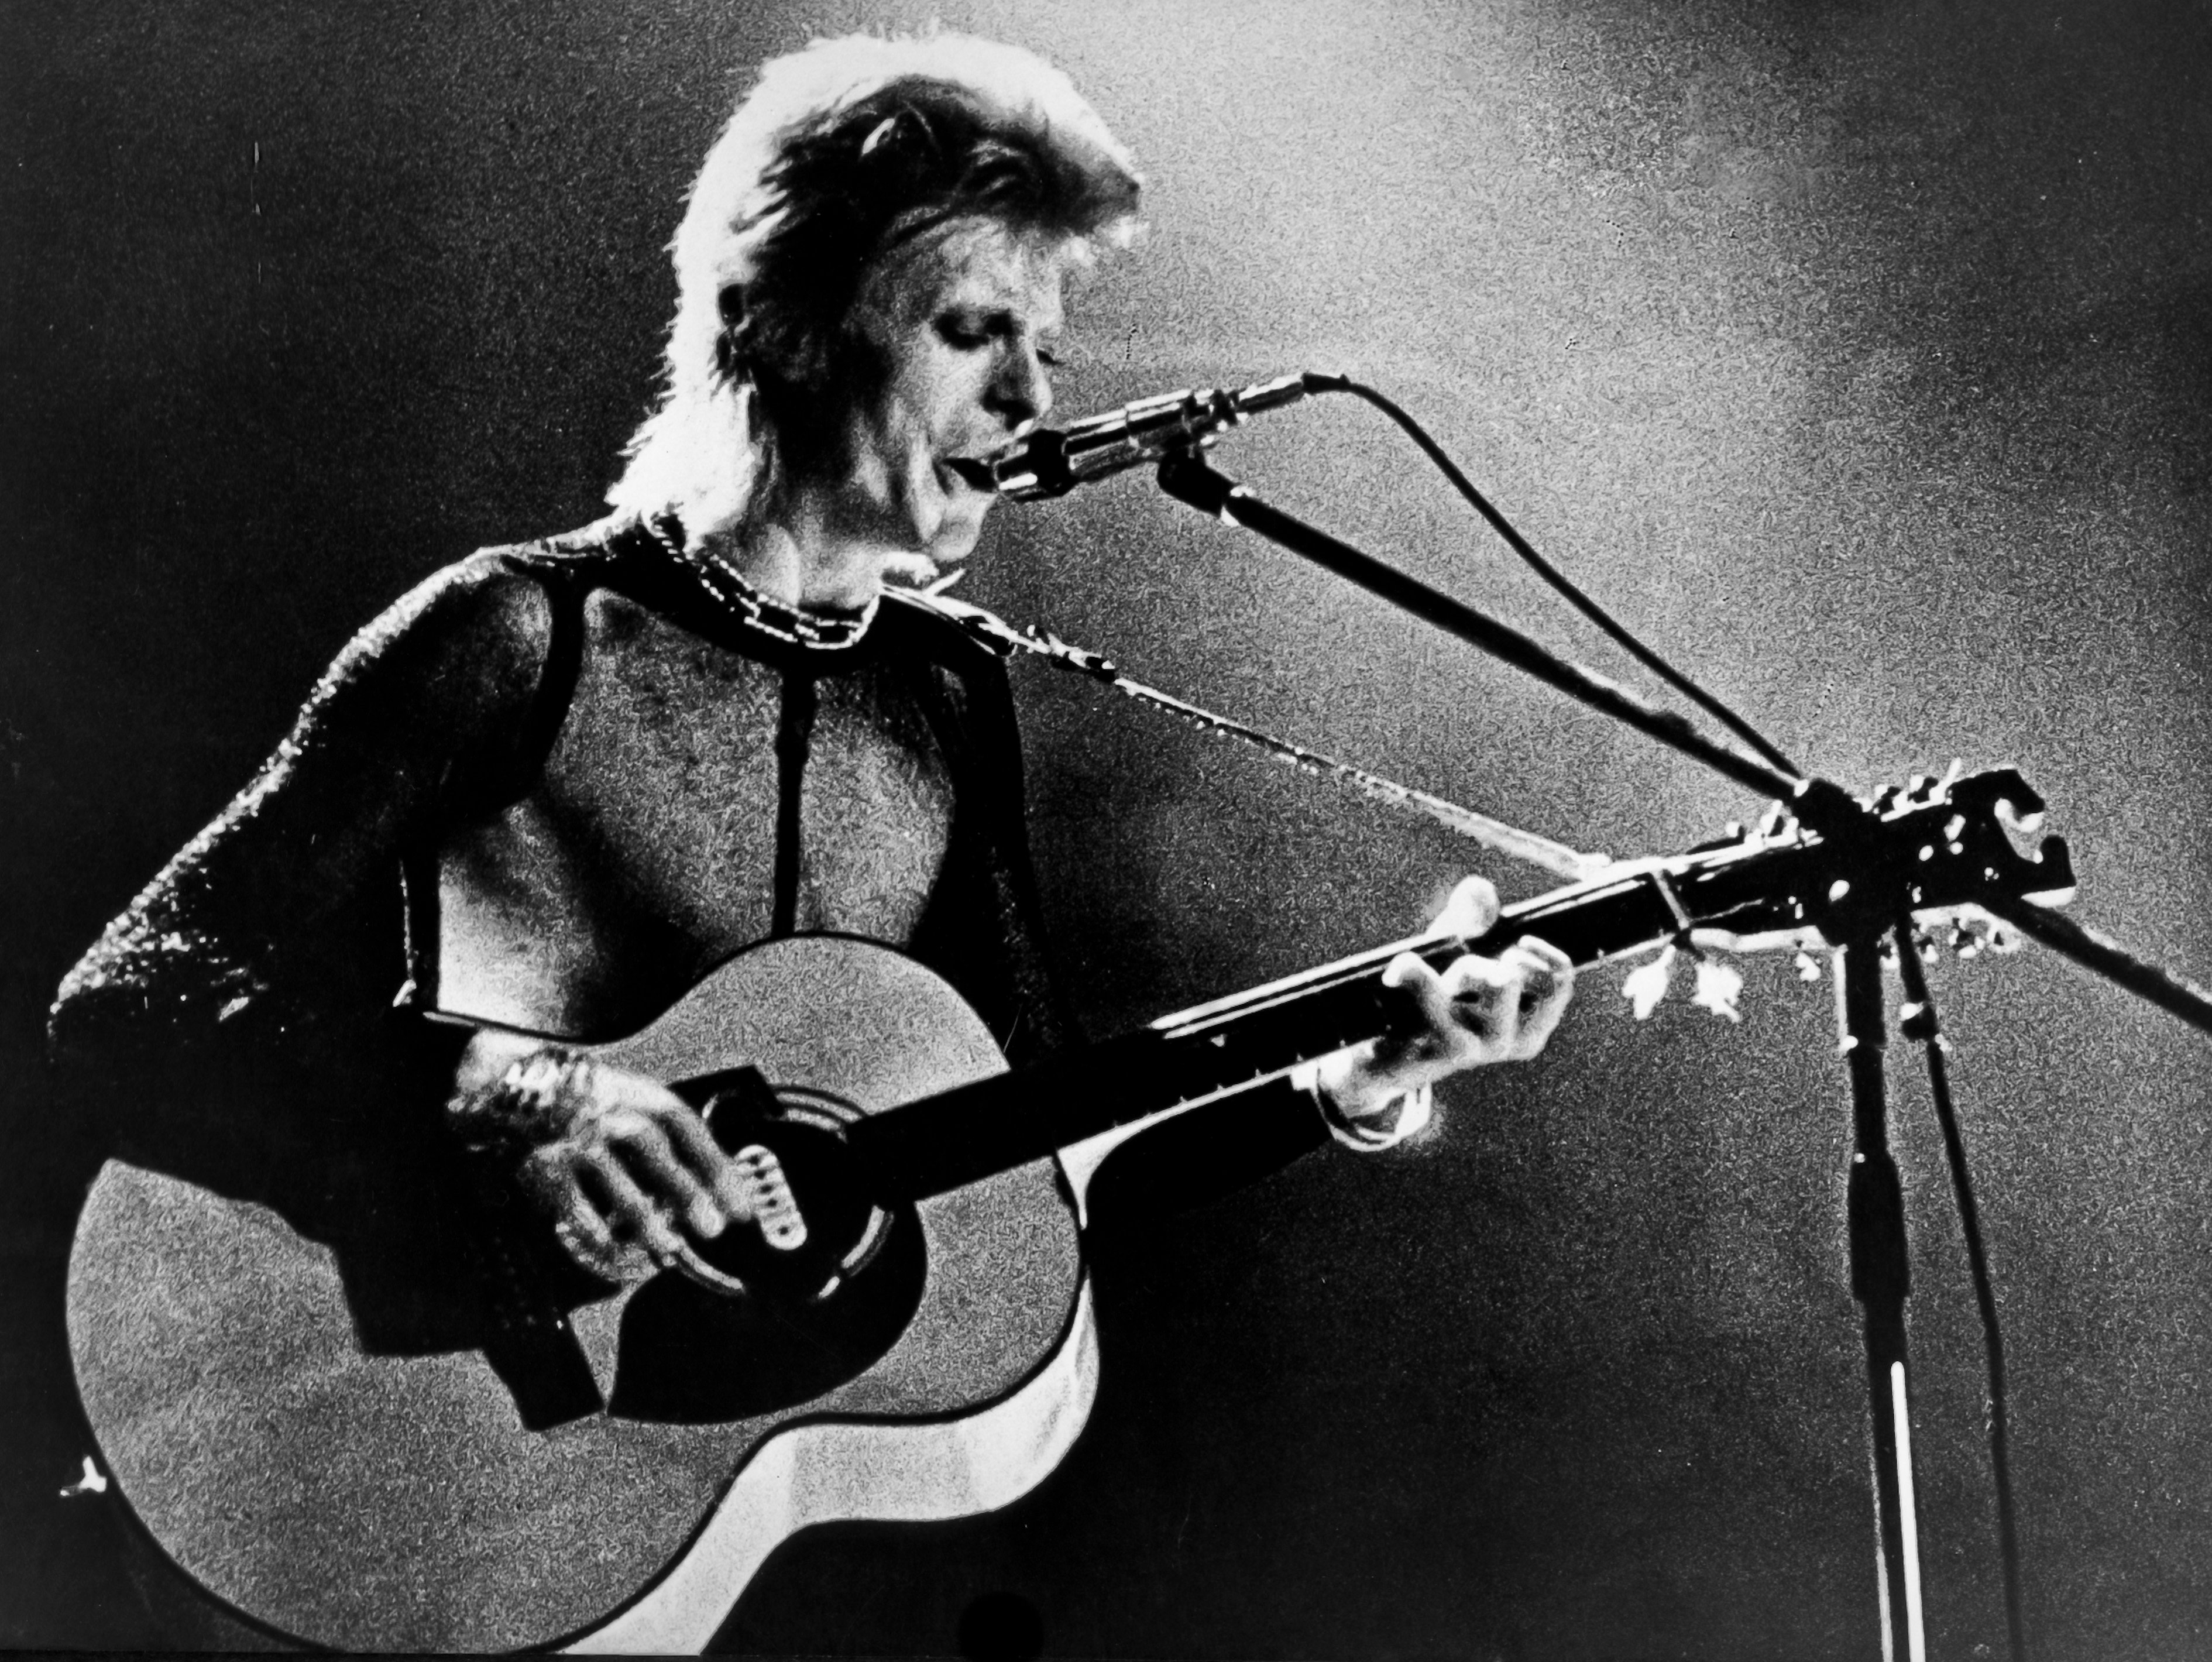 David Bowie during a performance in the 1970s. Photo: Getty Images